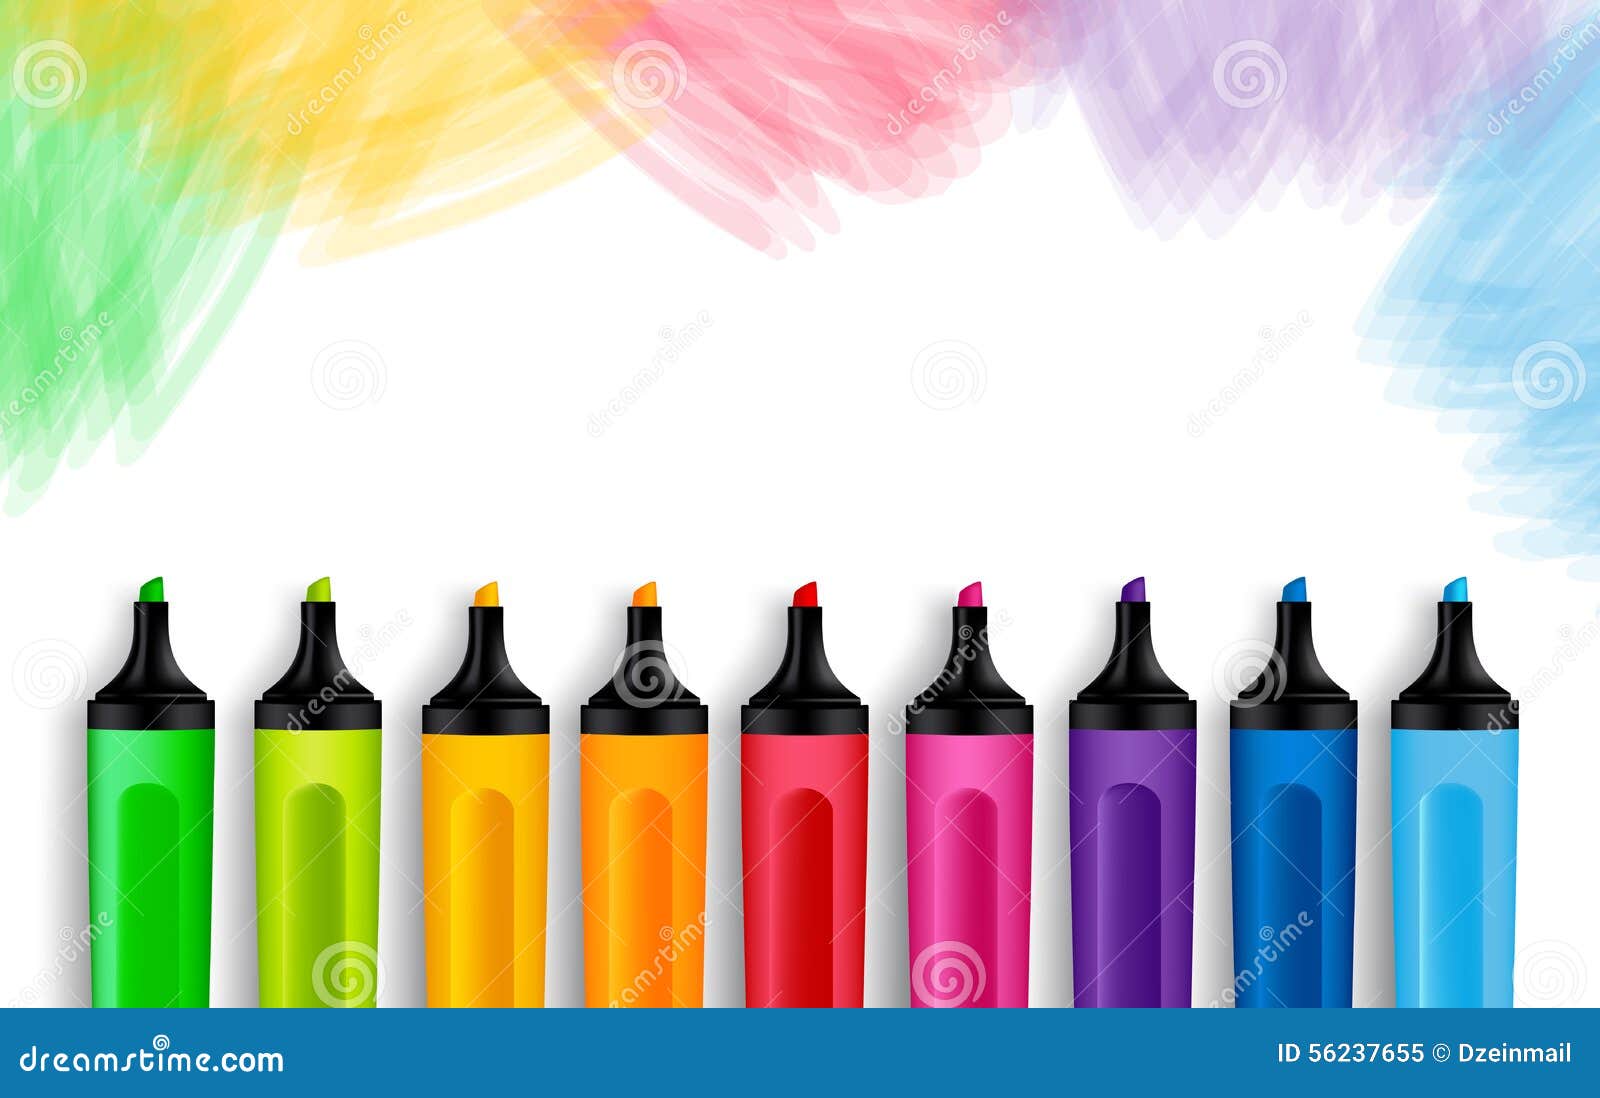 Set Of Realistic 3D Colorful Markers Stock Vector - Image: 56237655